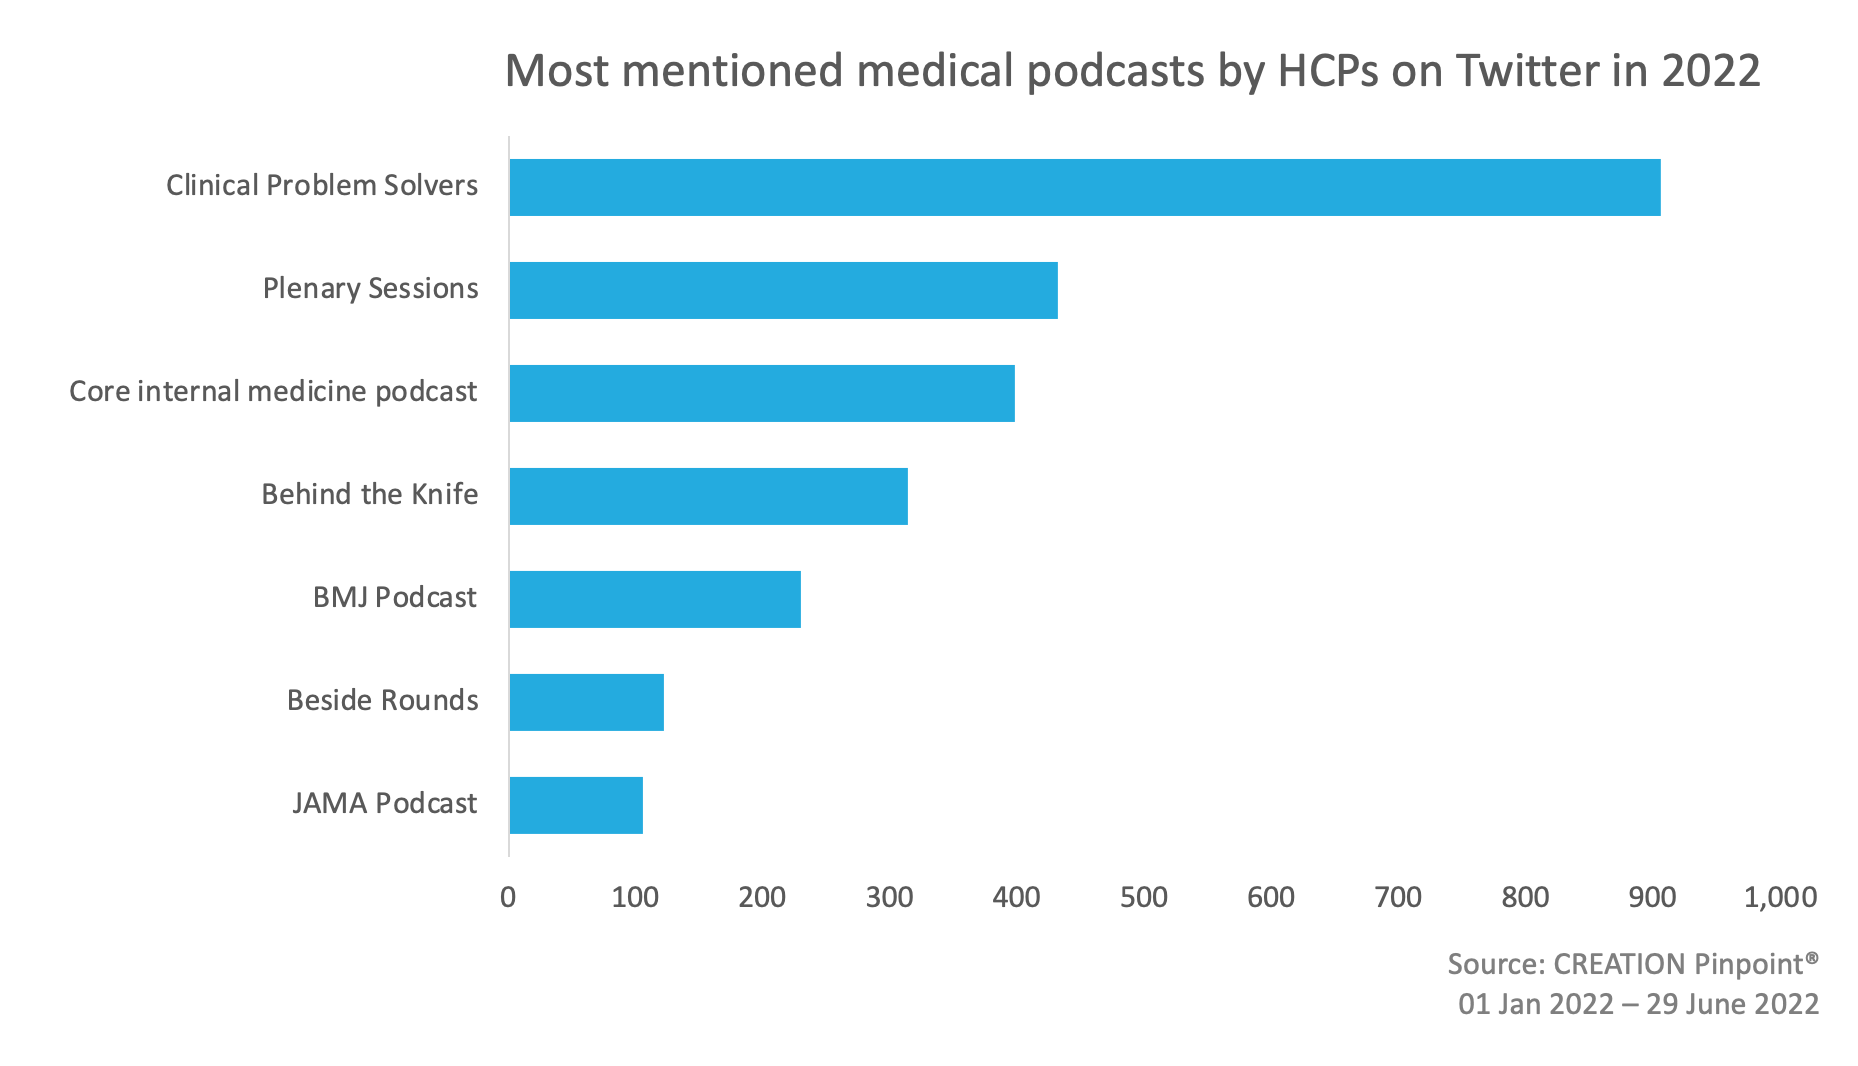 Graph showing most mentioned medical podcasts by HCPs on Twitter